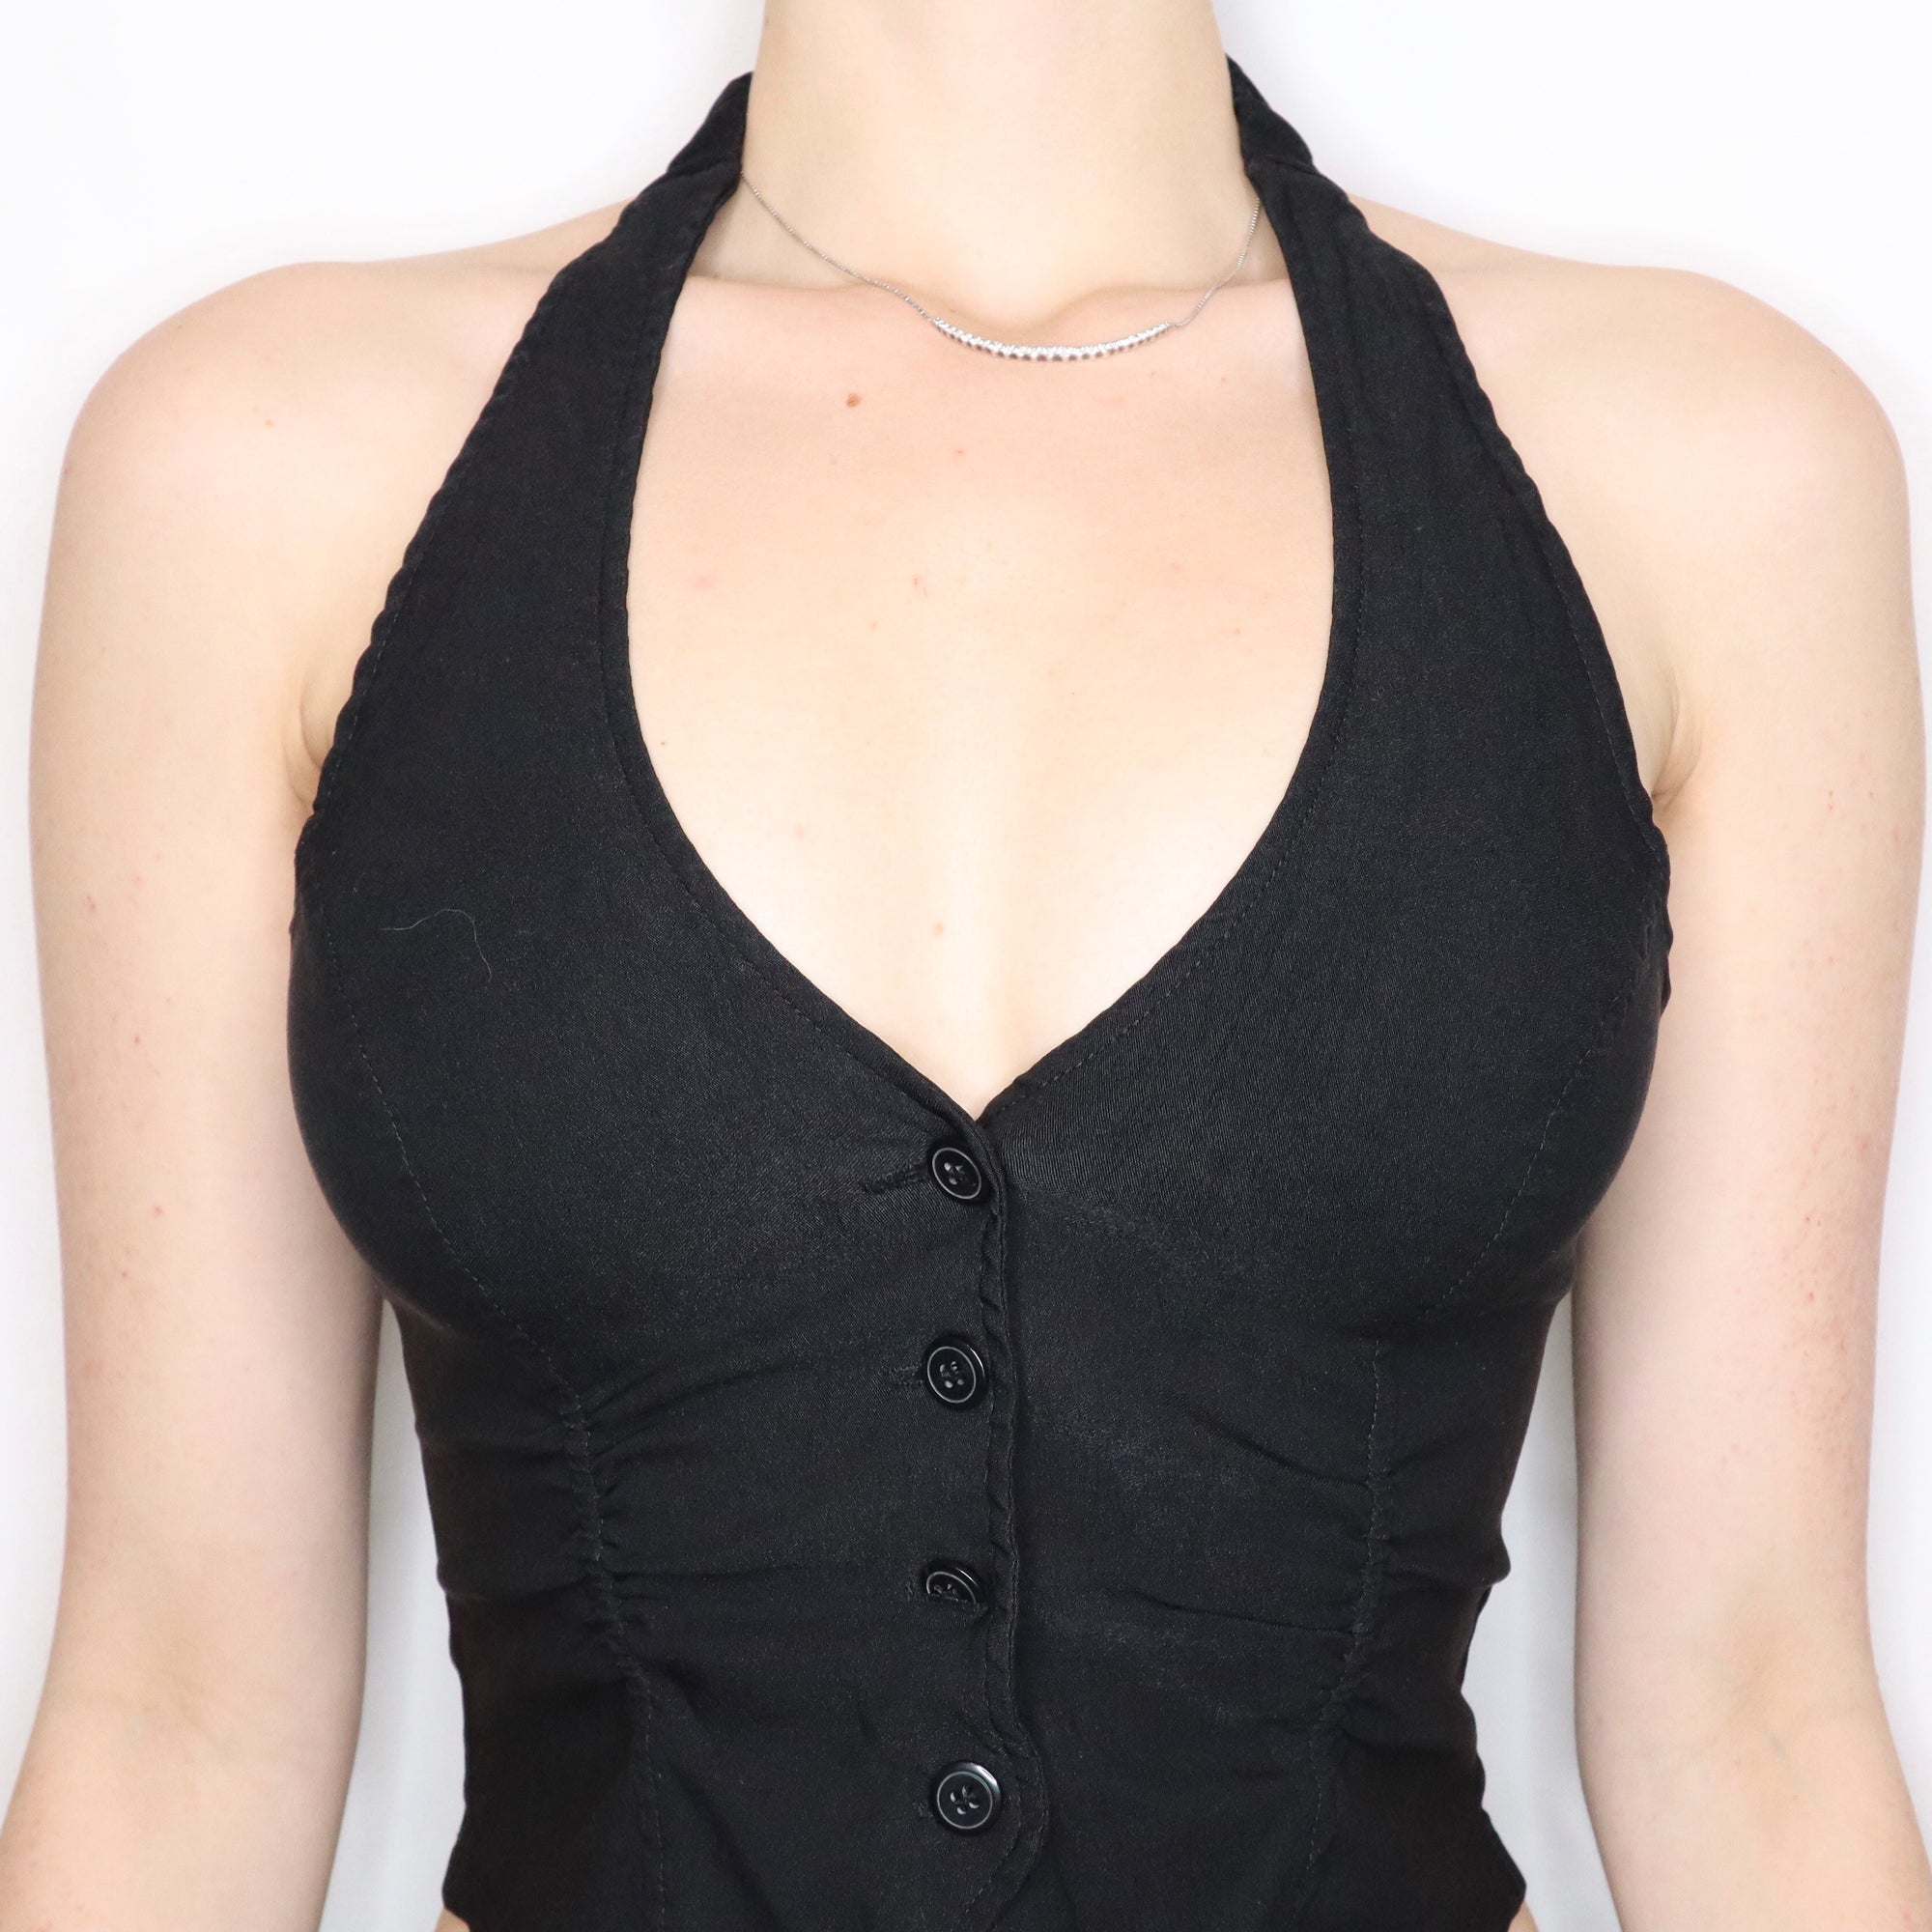 Vintage Early 2000s Stretchy Black Waistcoat Halter Top